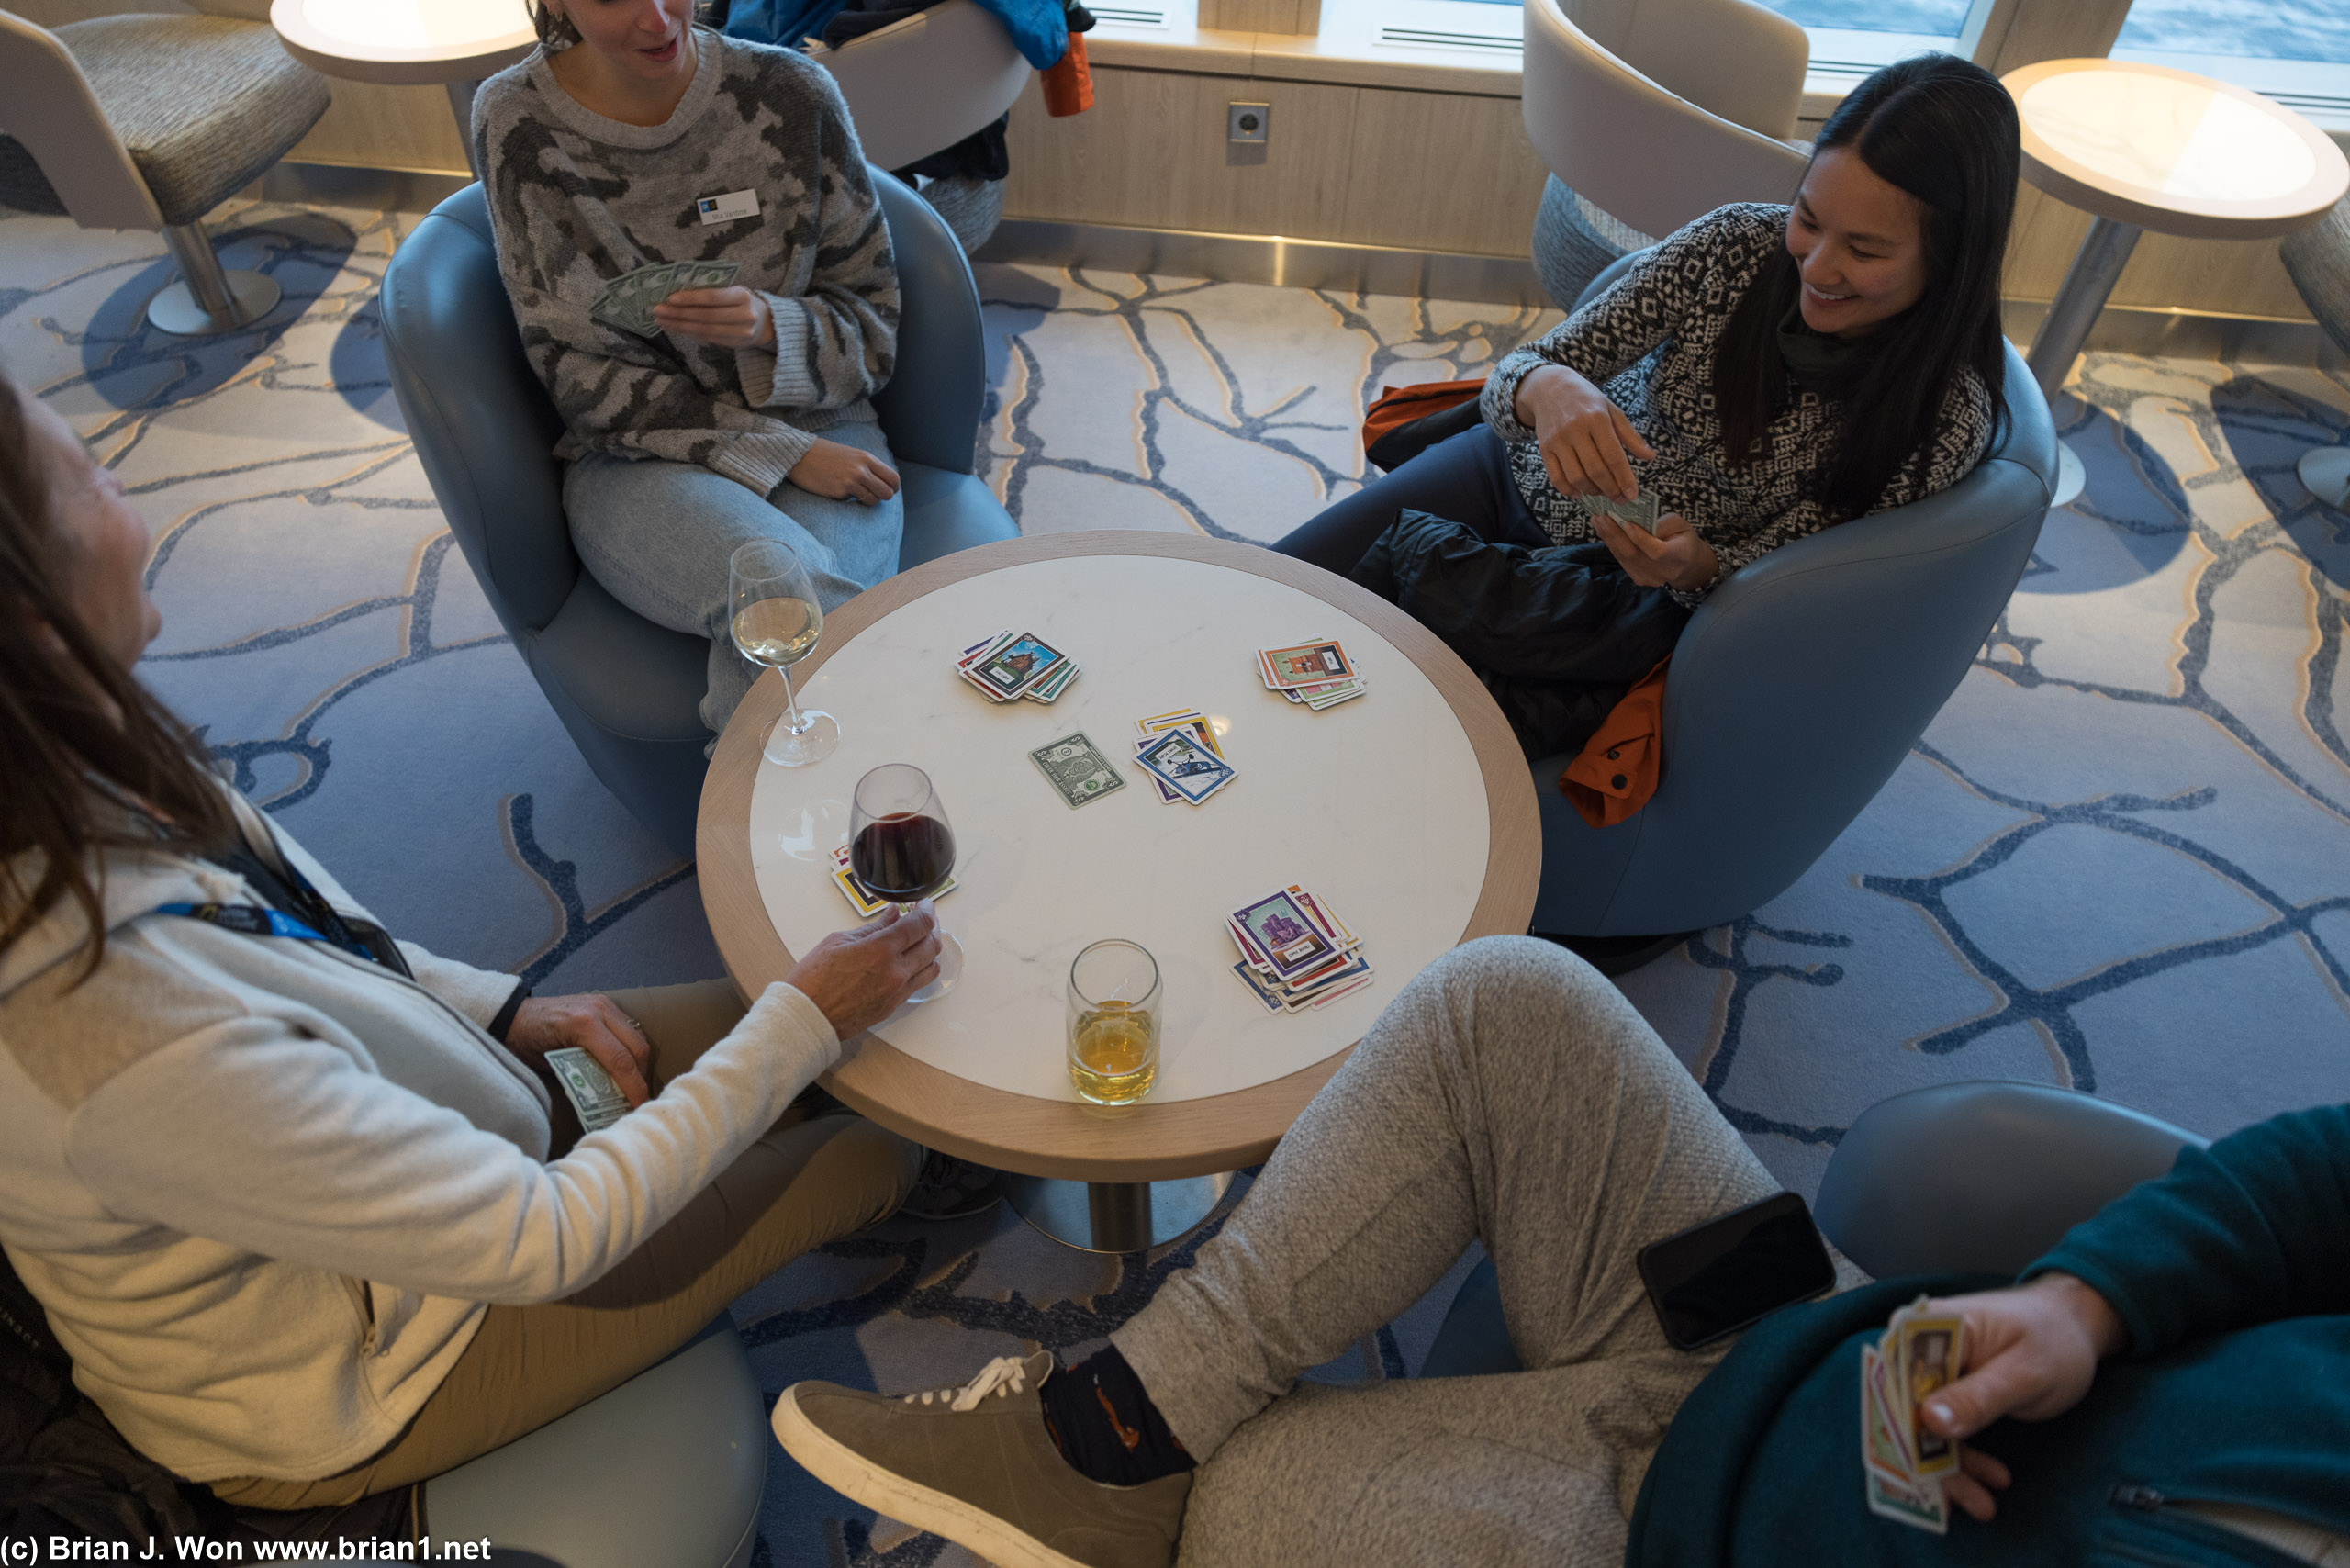 Board games in the lounge.